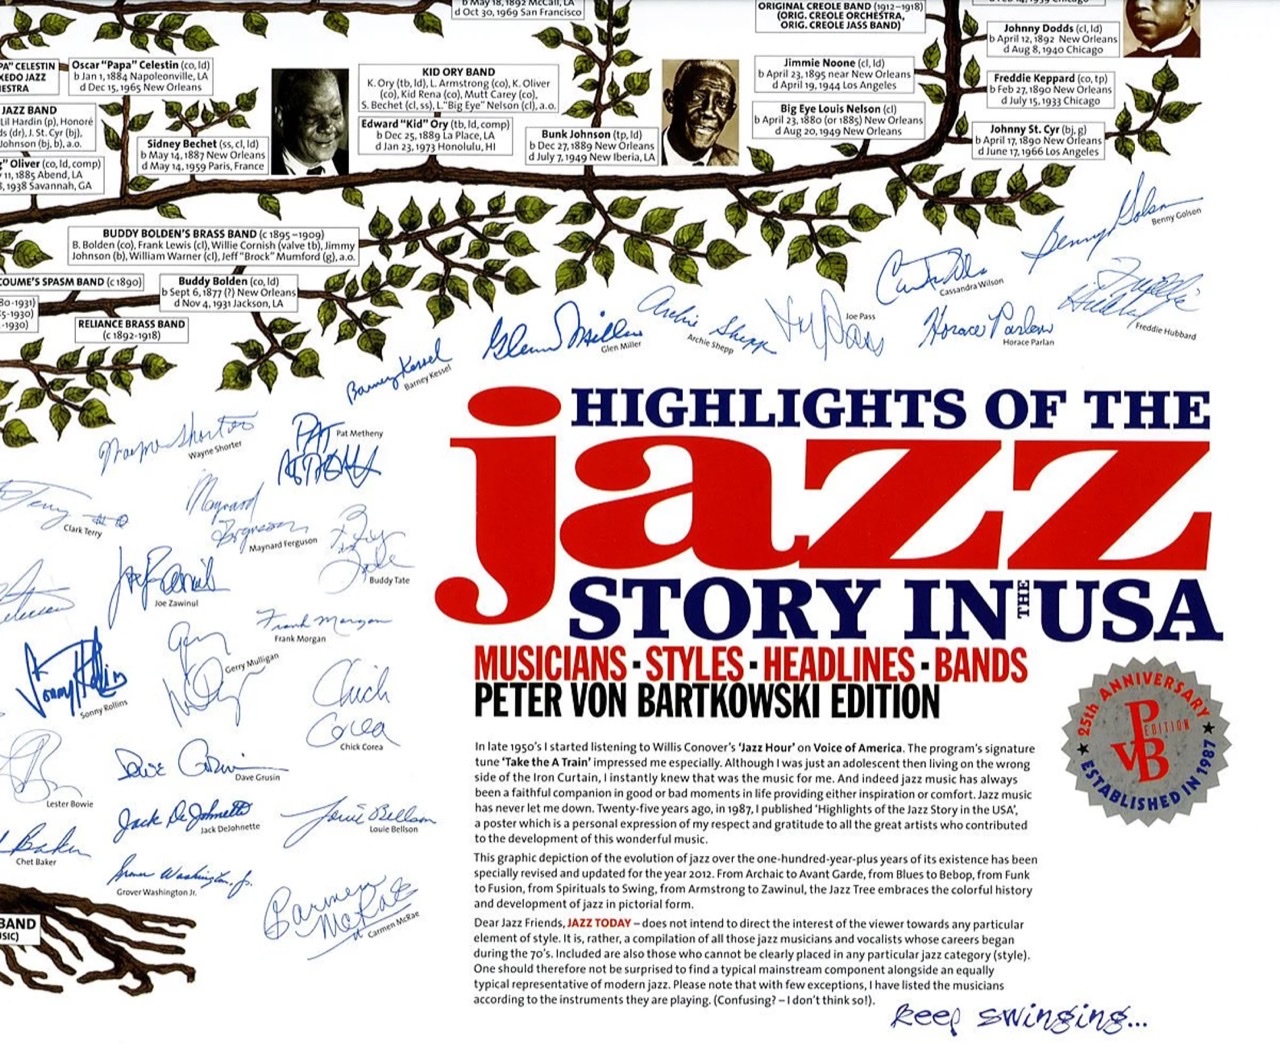 A closeup of the lower right corner of a gigantic color jazz tree on a white background with many branches representing jazz movements and jazz musicians representative of various jazz styles and displaying numerous jazz autographs.